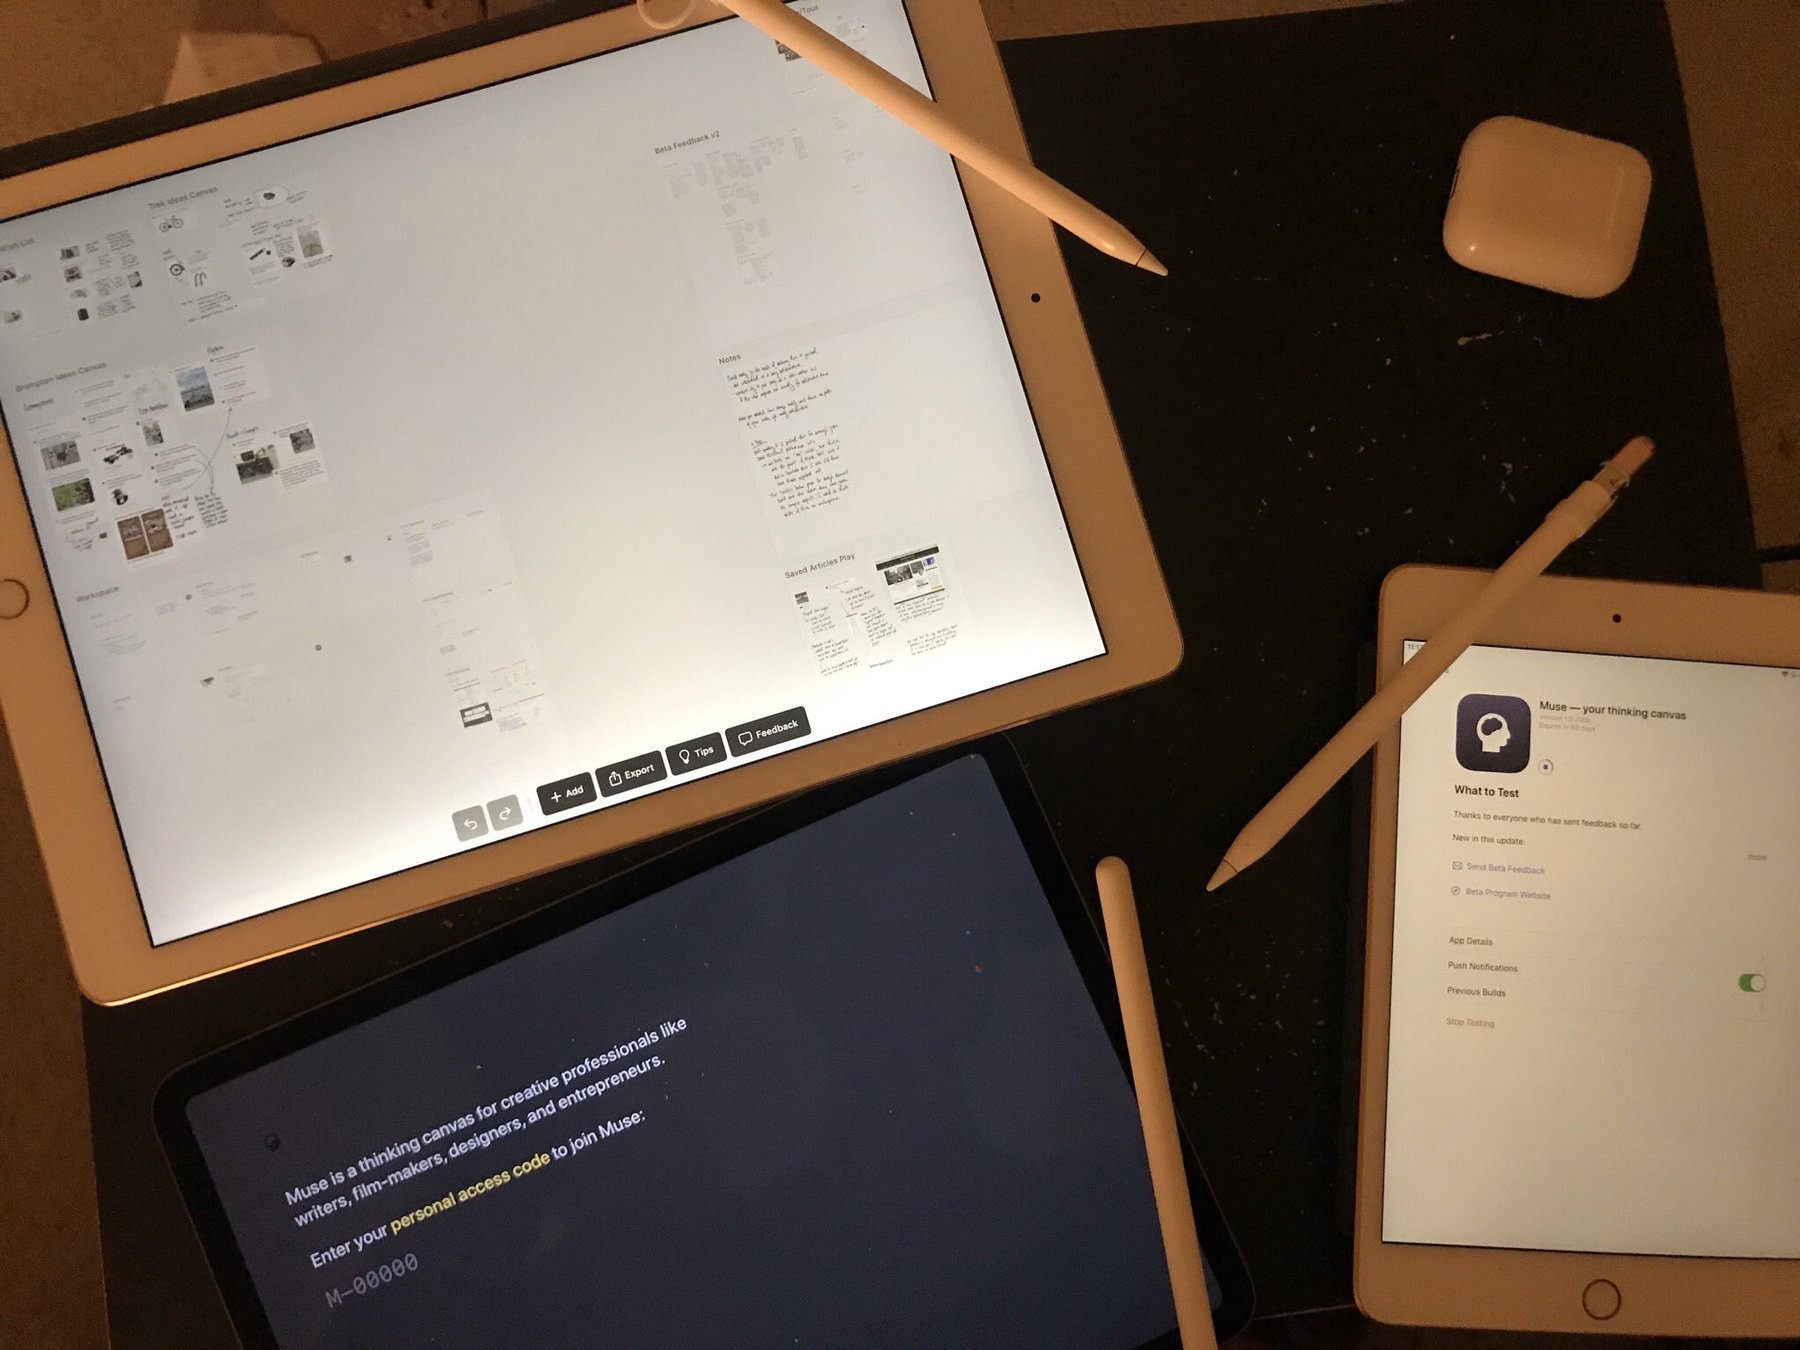 Three ipad devices showing the Muse beta